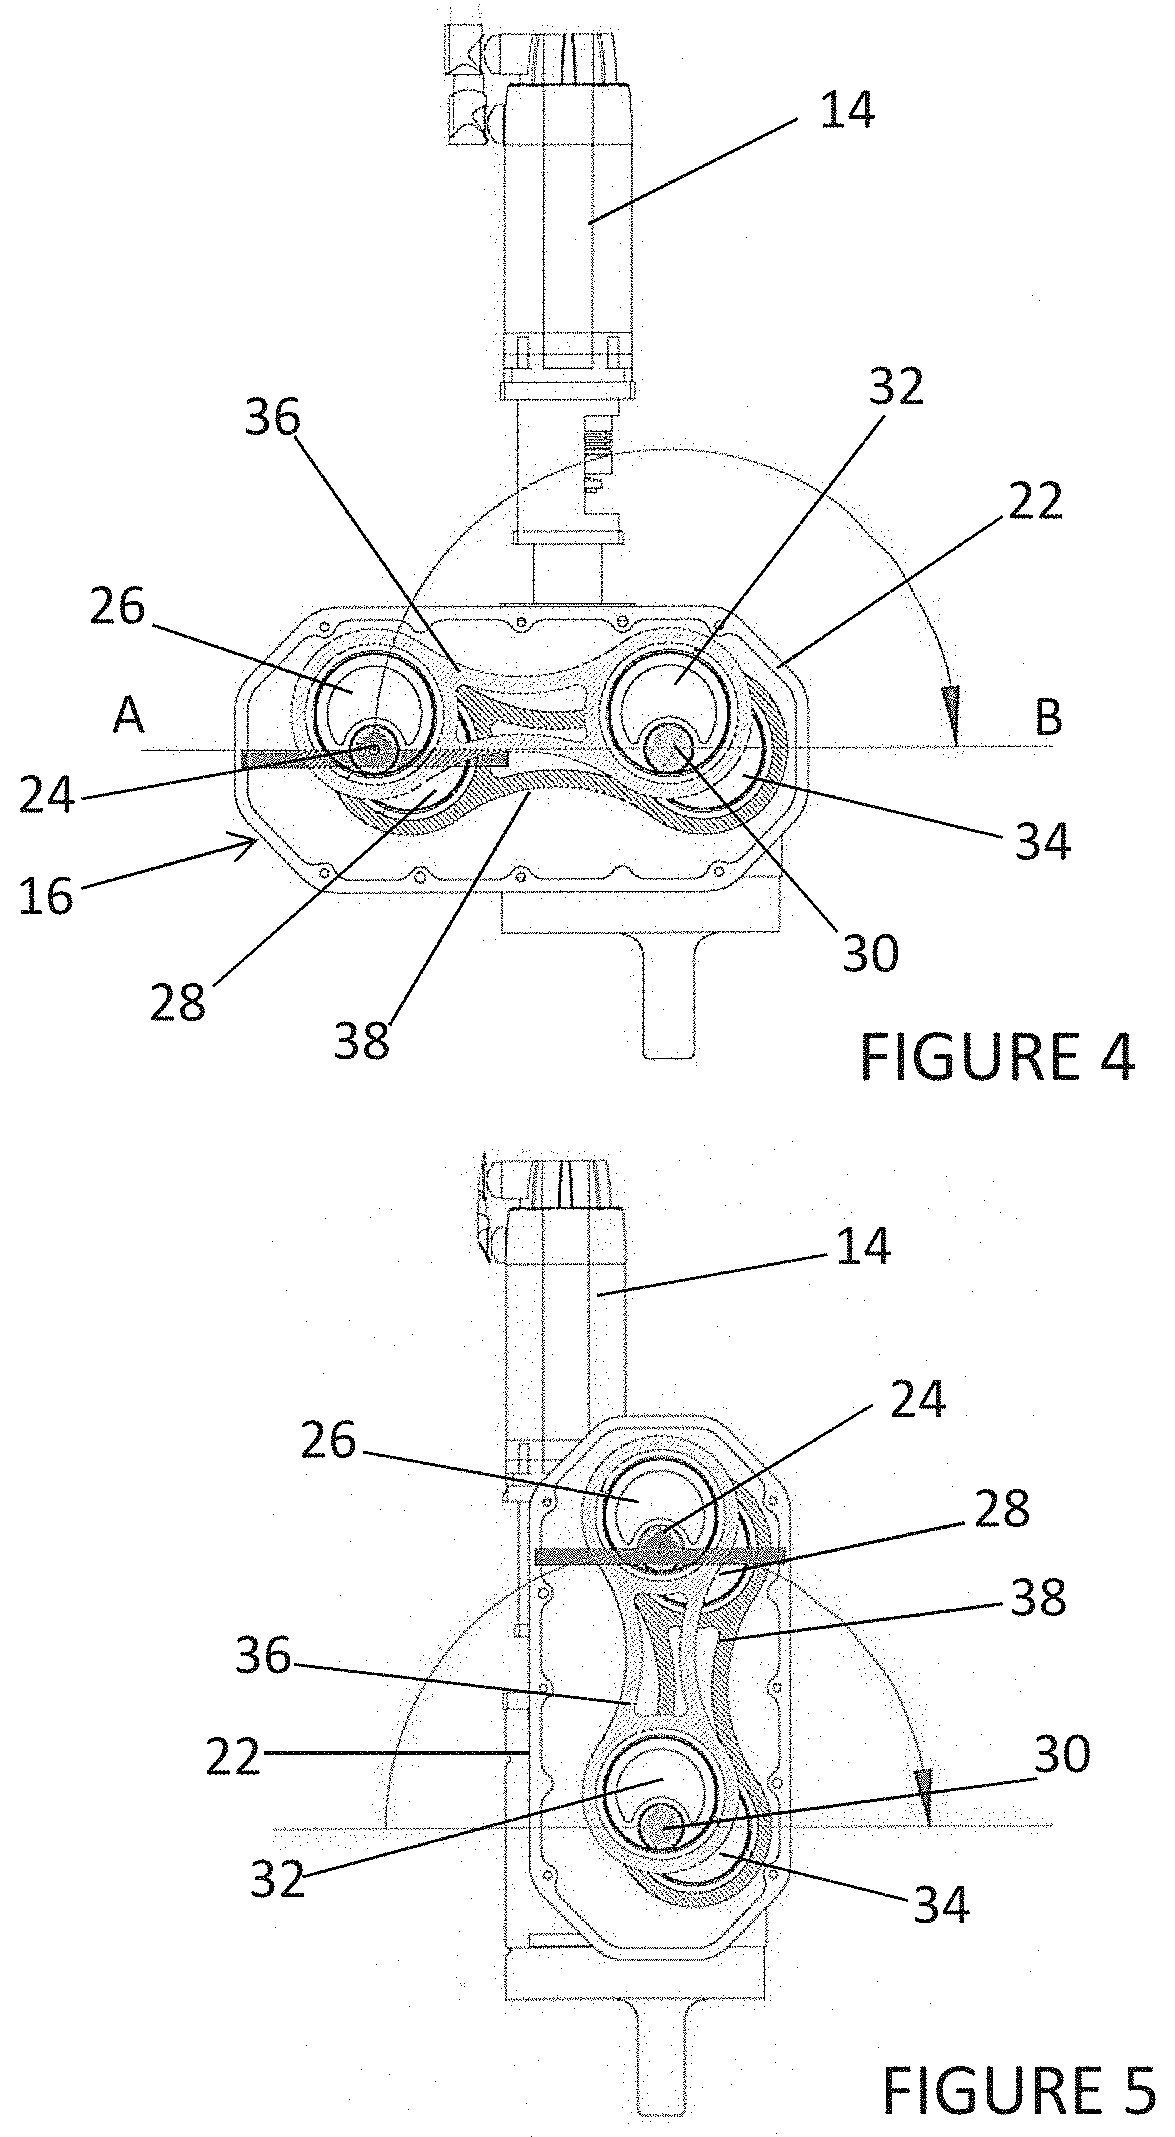 Takeout Mechanism for Machines for Forming Glass Objects